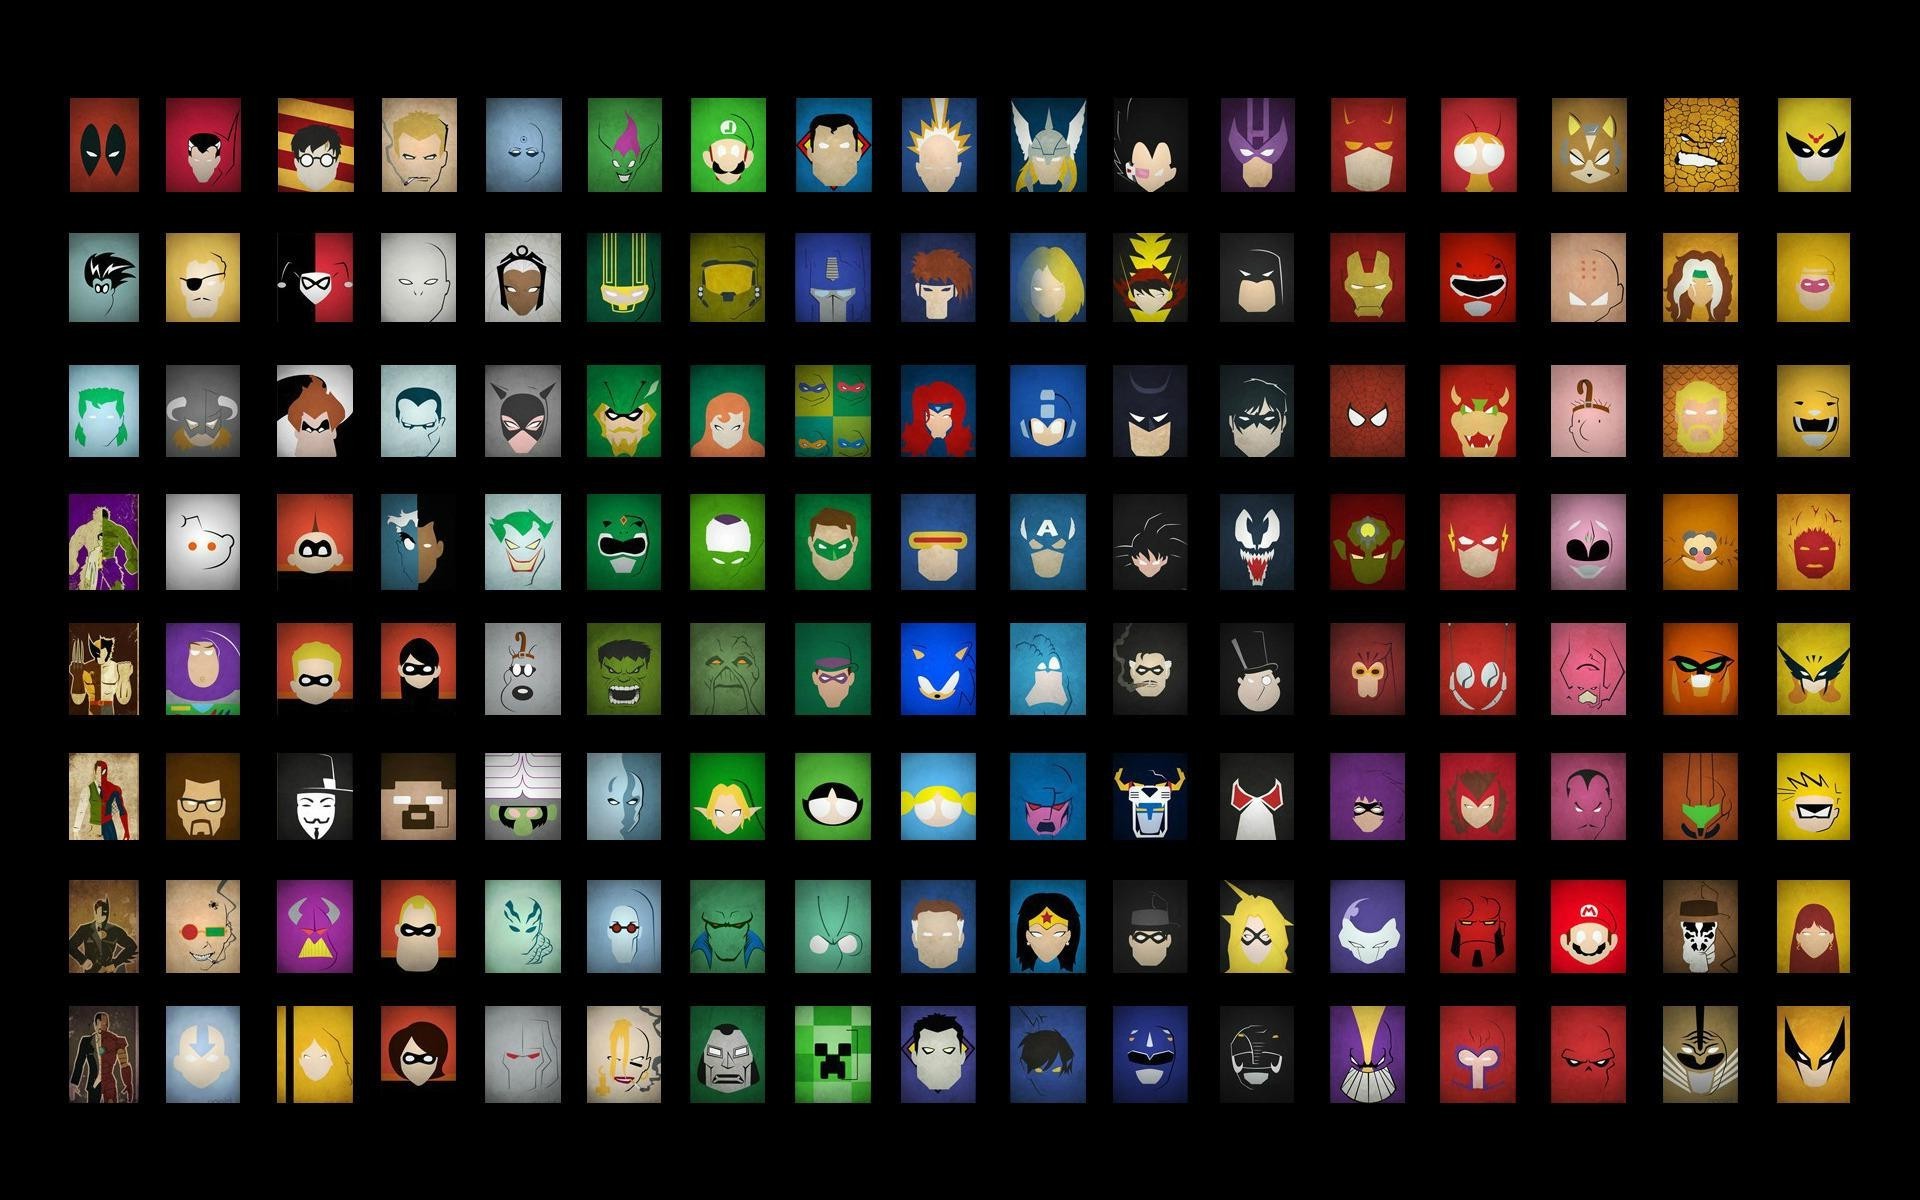 Wallpapers bowser DC Comics icons on the desktop